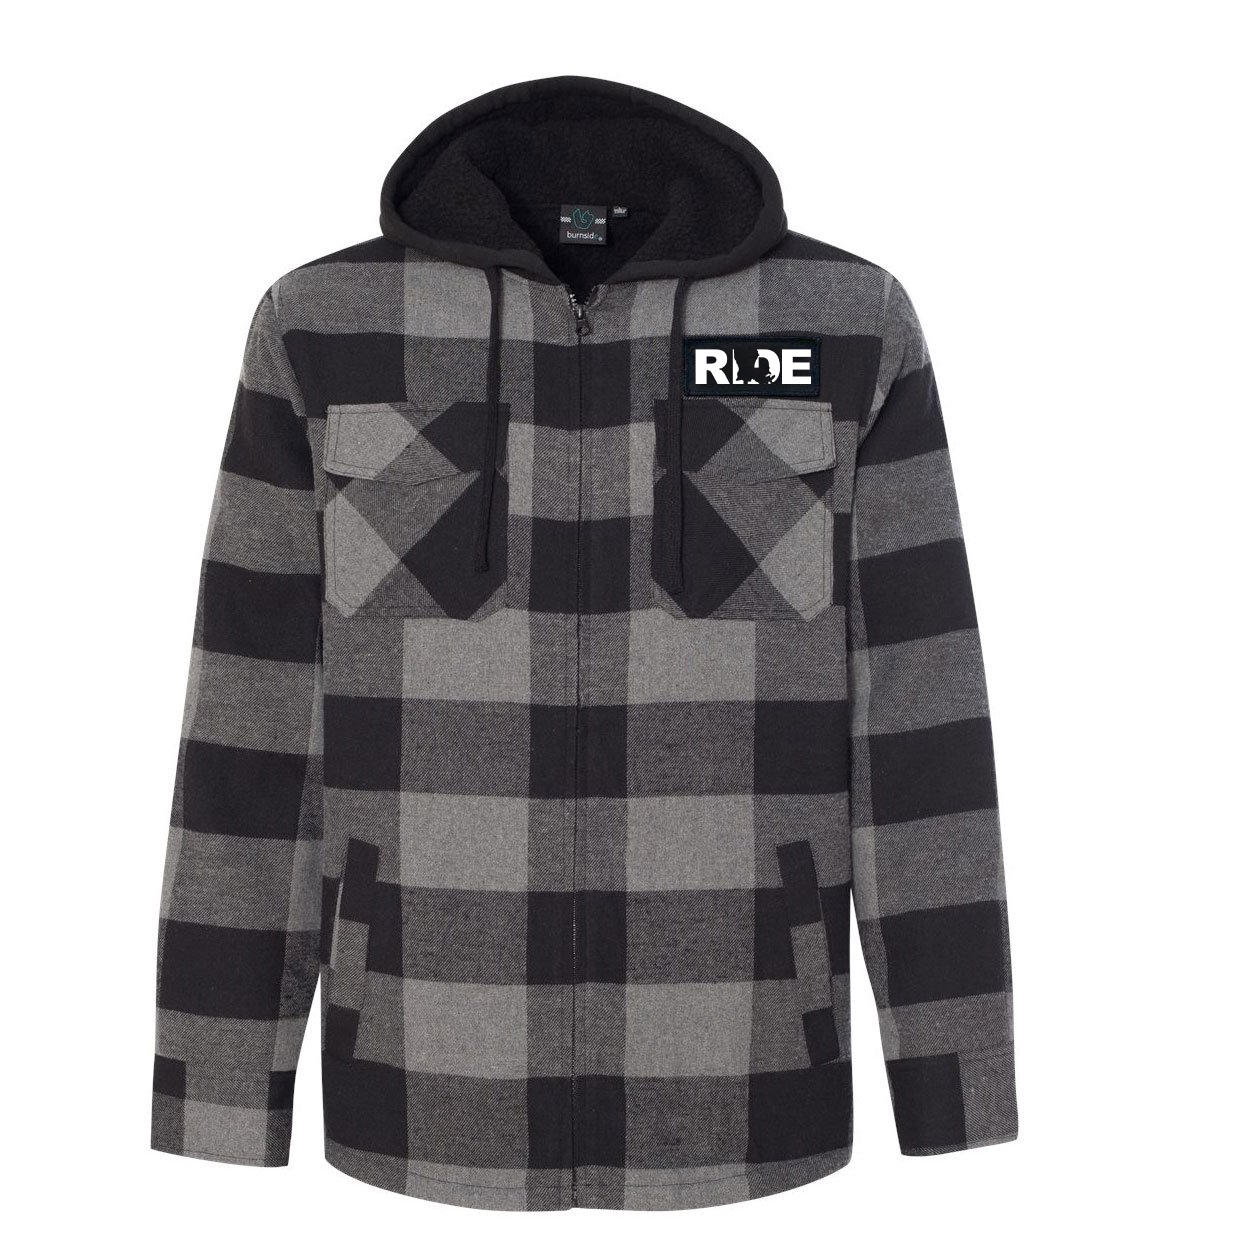 Ride Louisiana Classic Unisex Full Zip Woven Patch Hooded Flannel Jacket Black/Gray (White Logo)